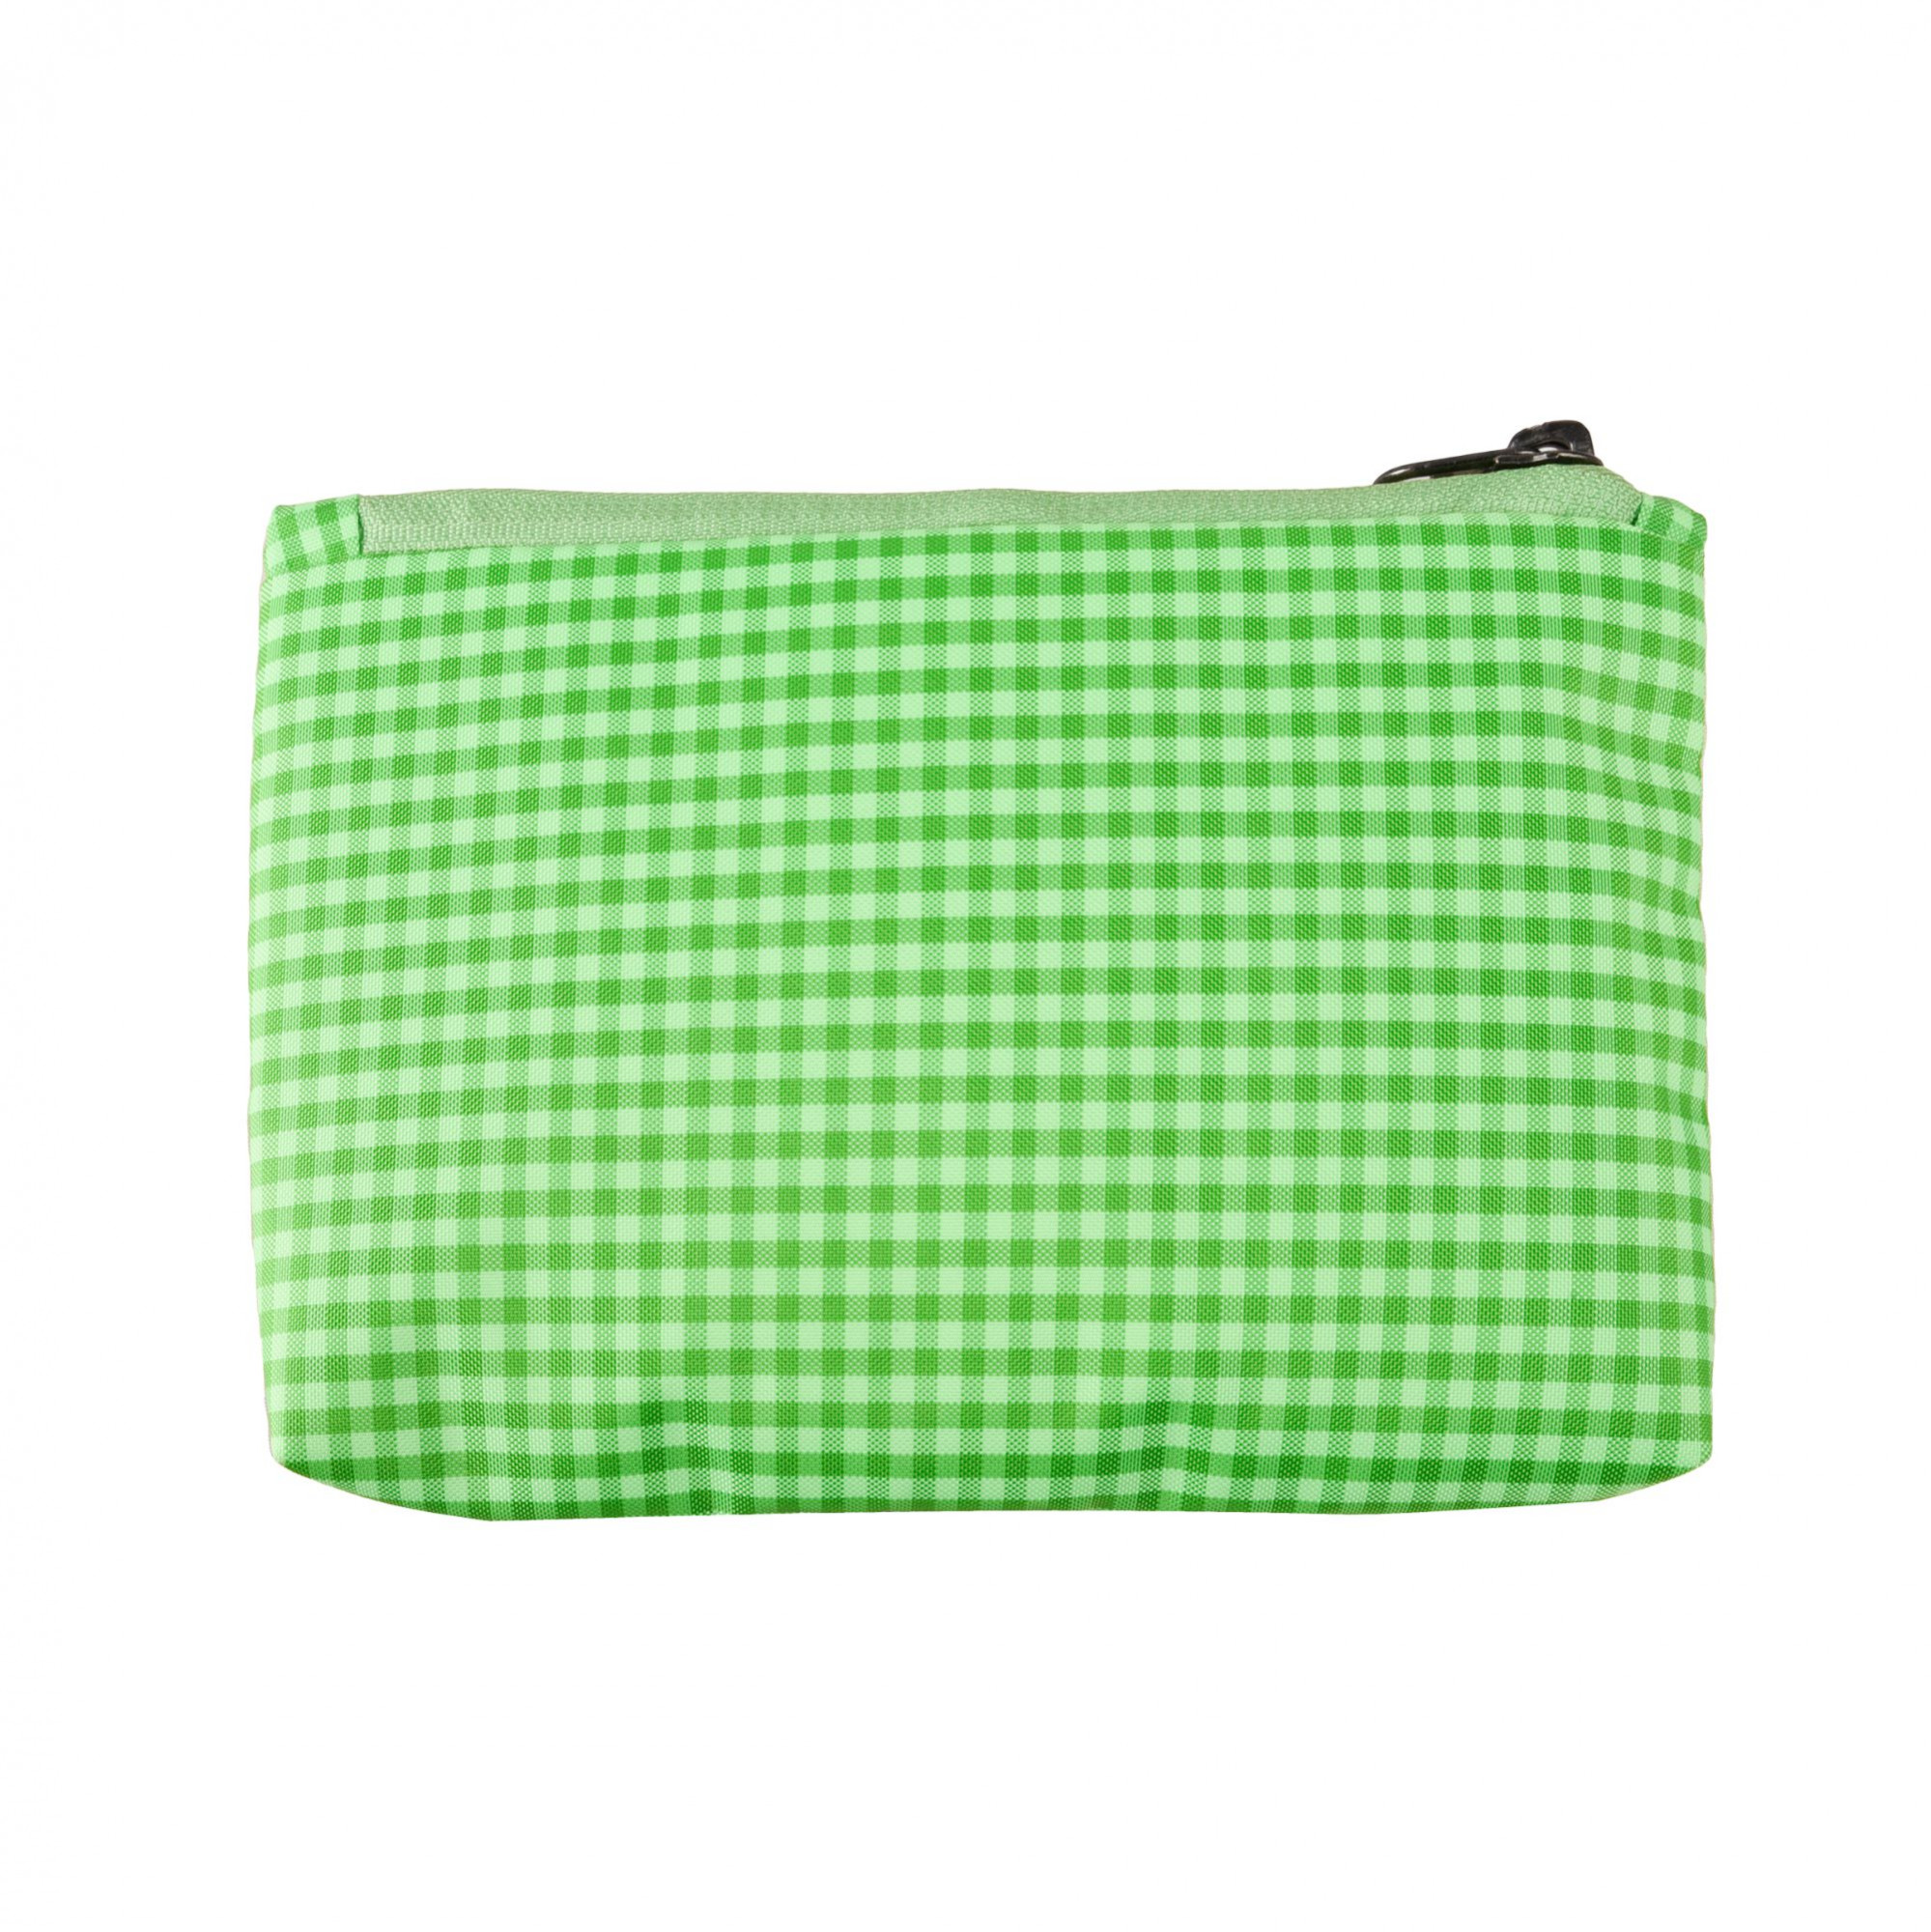 Kuber Industries Pencil Pouch | Square Stationary Pouch | Pen-Pencil Box for Kids | School Geometry Pouch | Pencil Utility Bag | Marvel Pencil Organizer | Green & Royal Blue